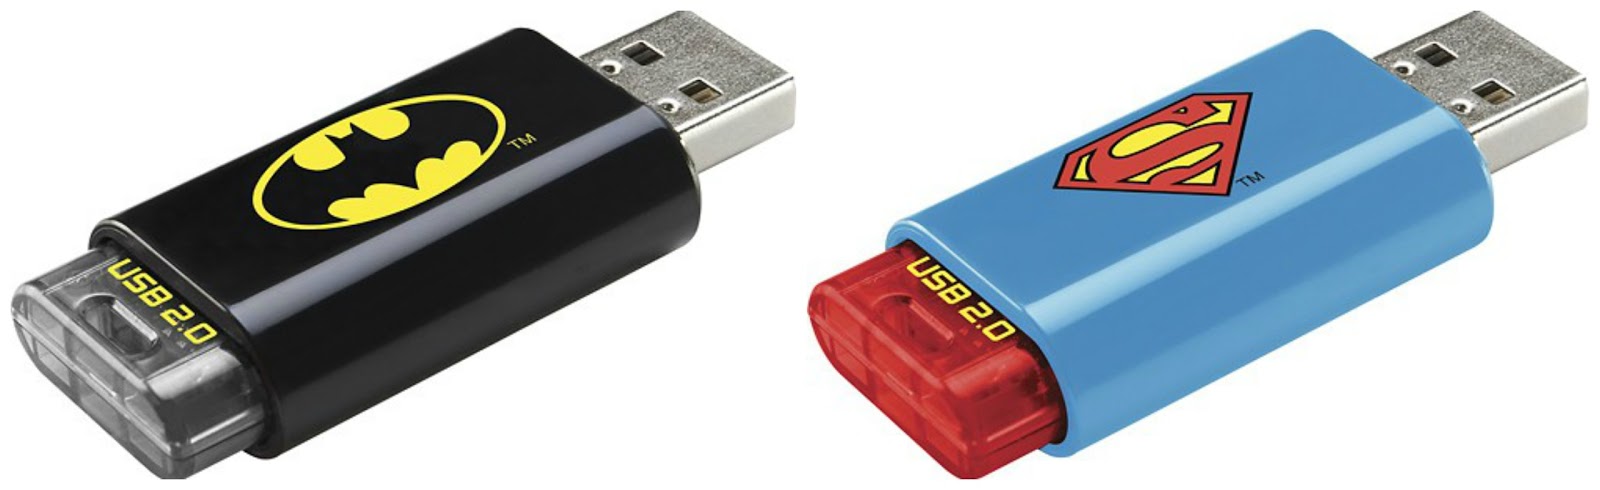 bison for mig råd One Momma Saving Money: Batman or Superman 8GB Flash Drive only $3.99 each